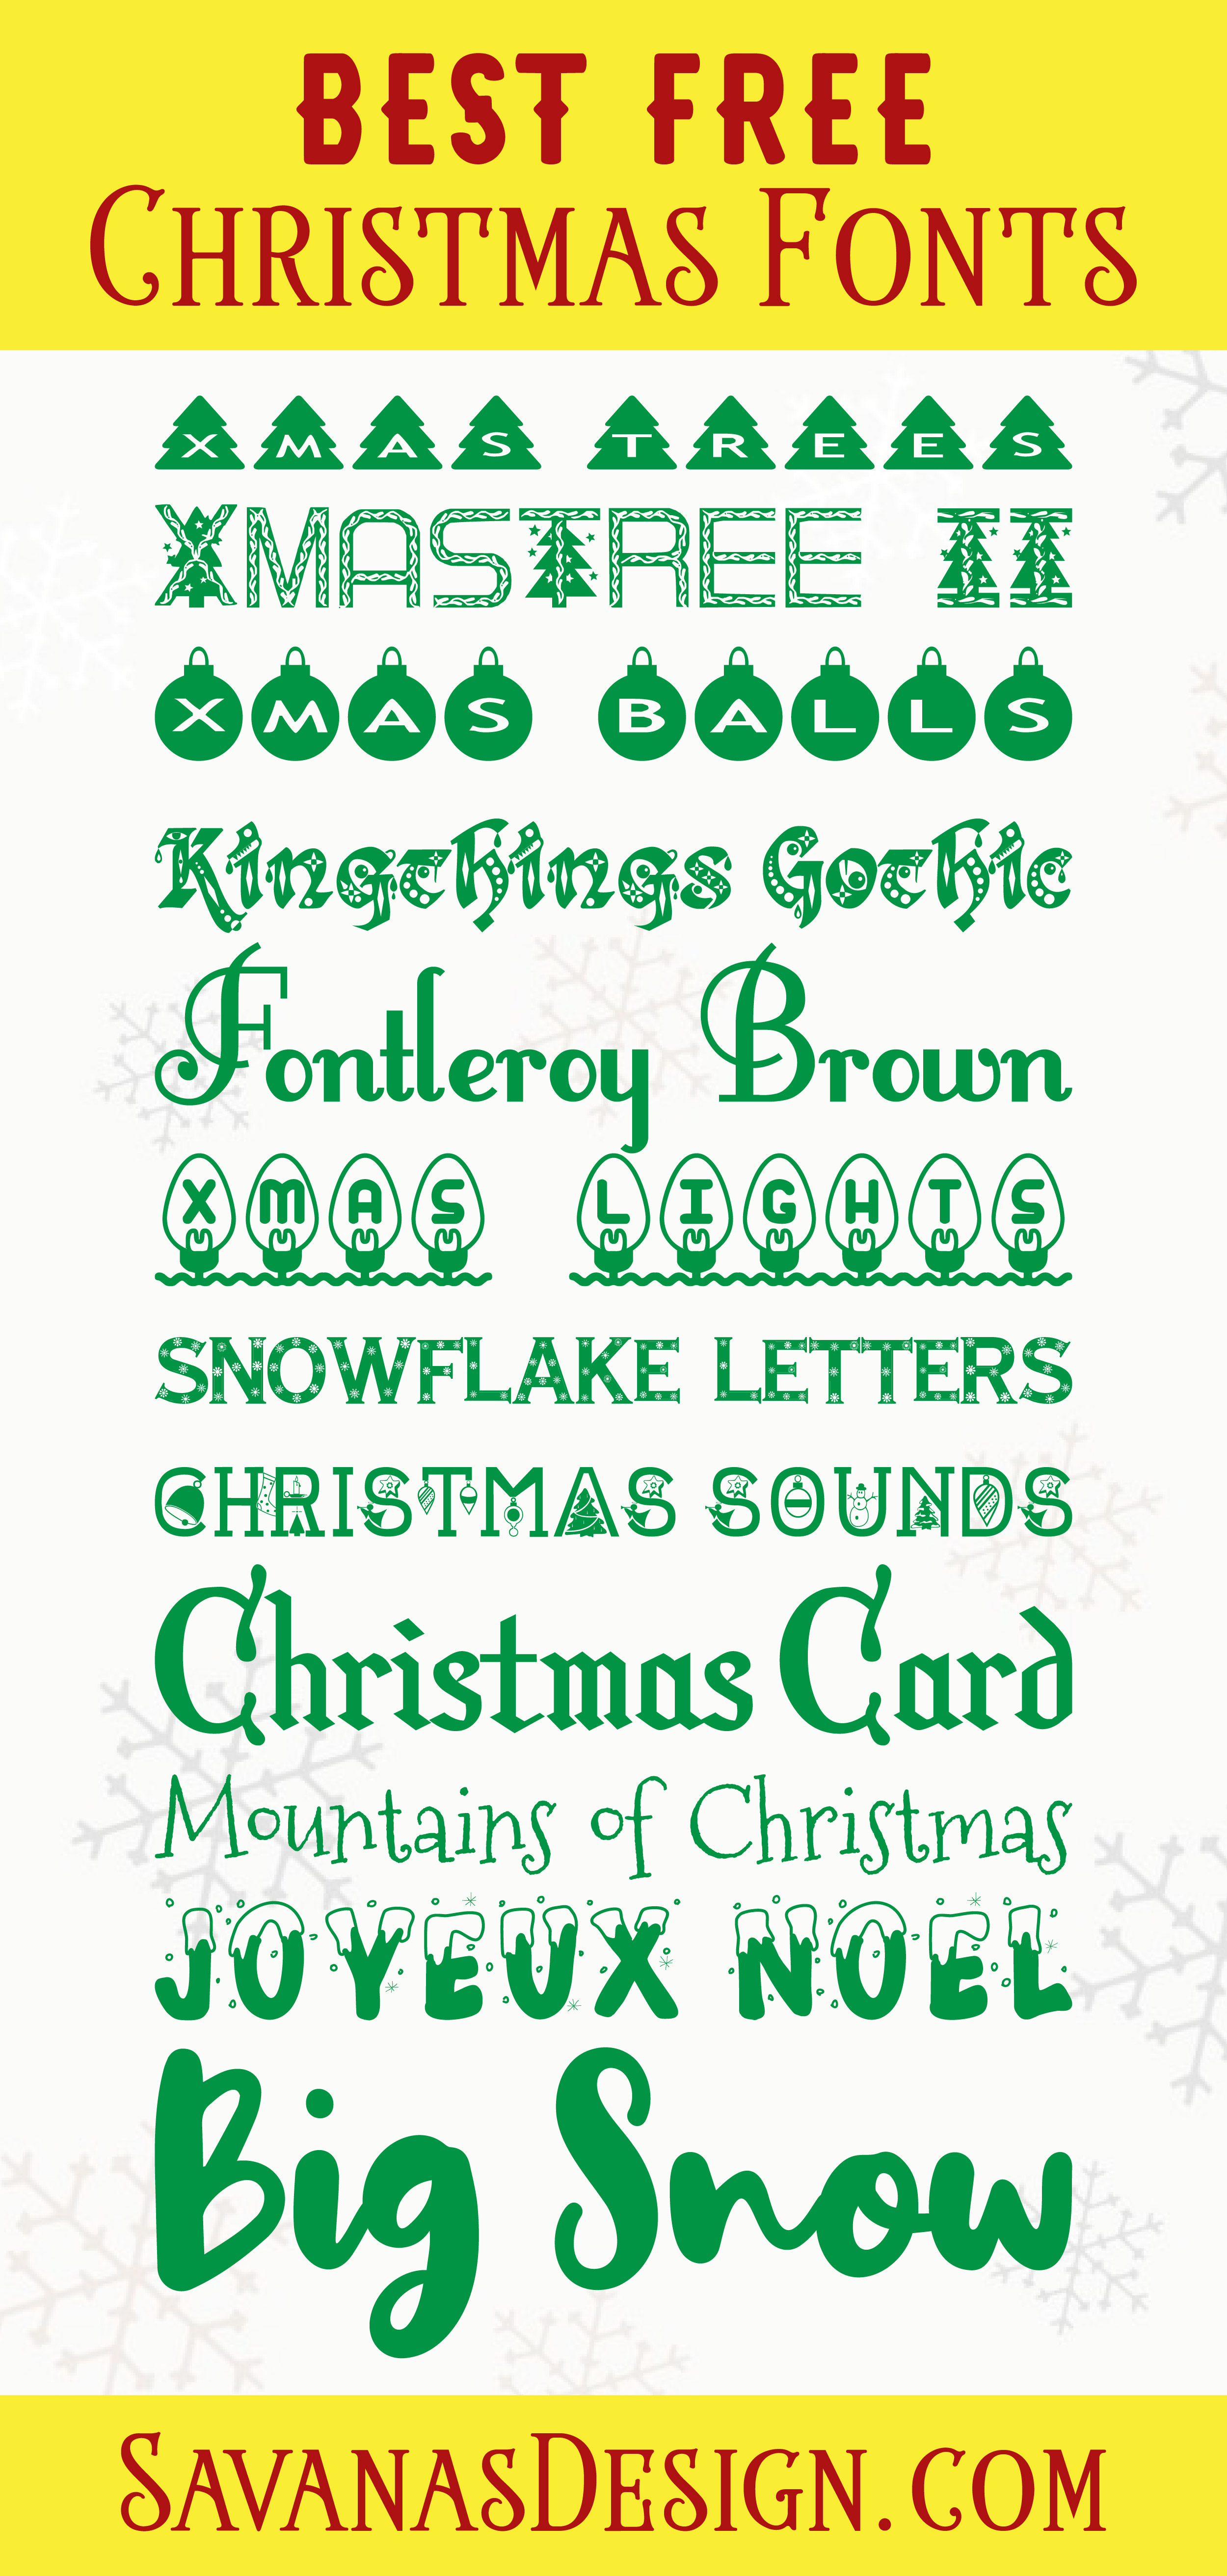 Download Best Free Christmas Fonts Svg Eps Png Dxf Cut Files For Cricut And Silhouette Cameo By Savanasdesign